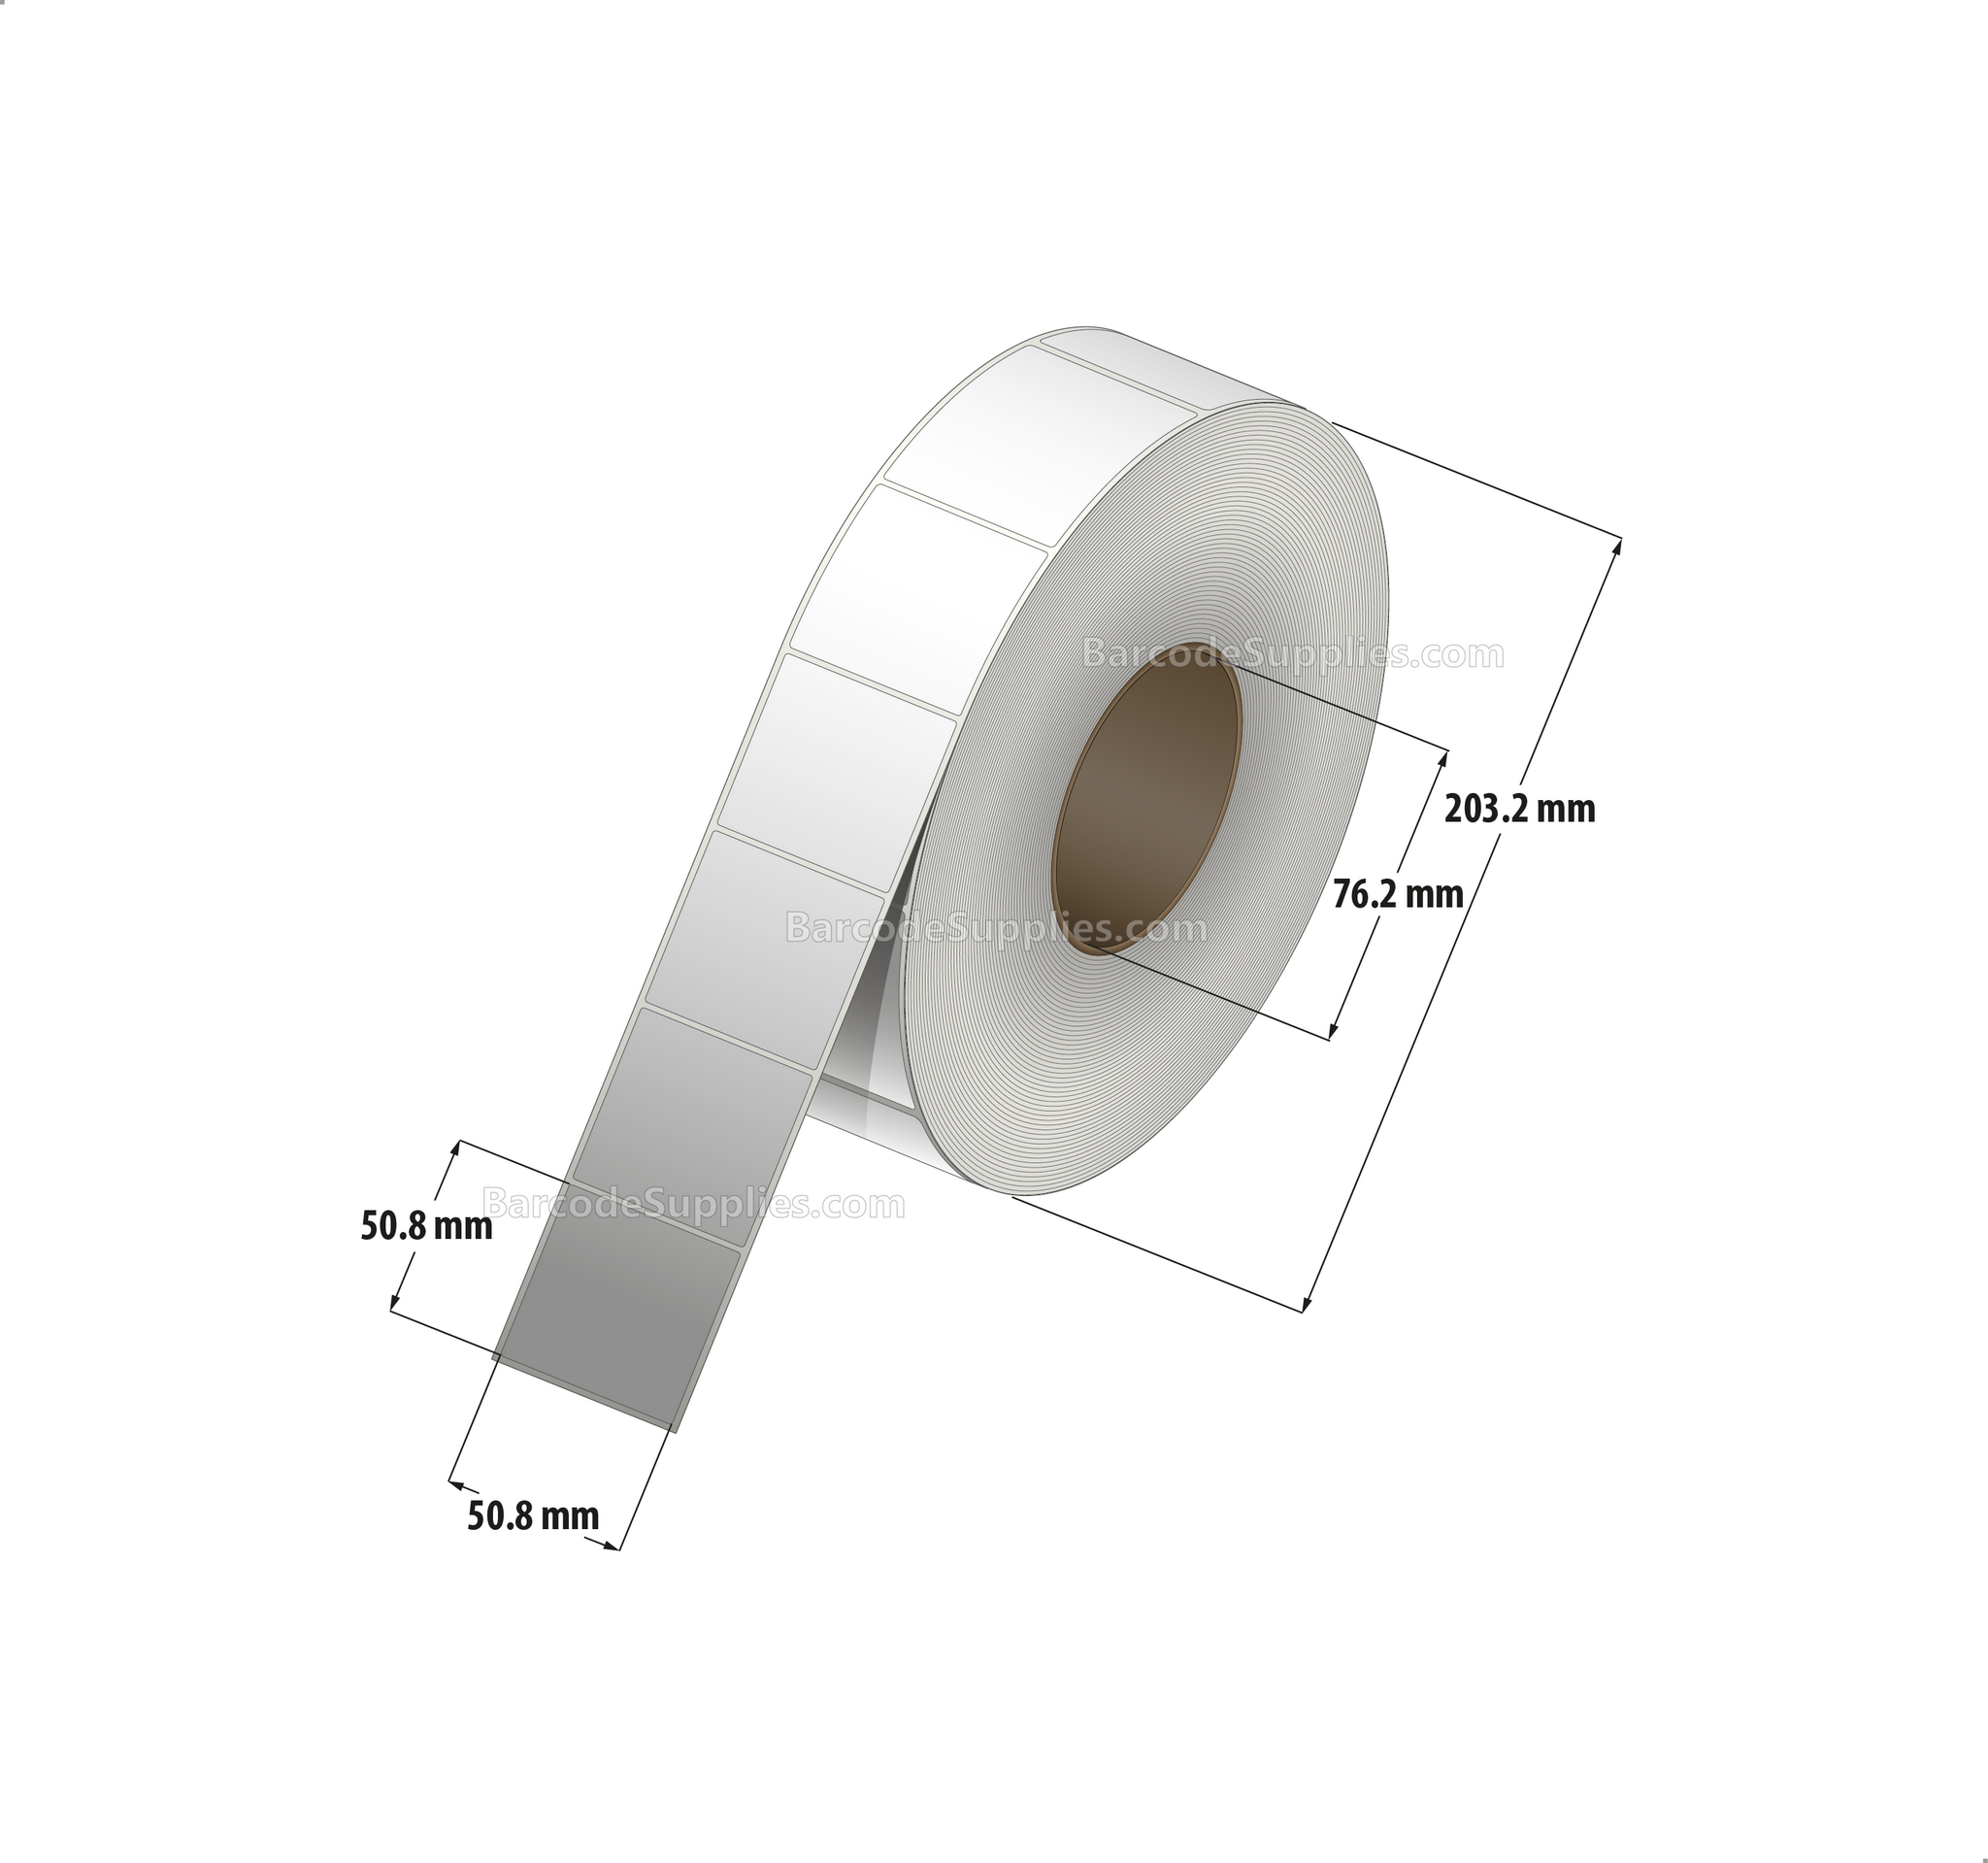 2 x 2 Thermal Transfer White Labels With Permanent Adhesive - No Perforation - 2900 Labels Per Roll - Carton Of 8 Rolls - 23200 Labels Total - MPN: RT-2-2-2900-NP